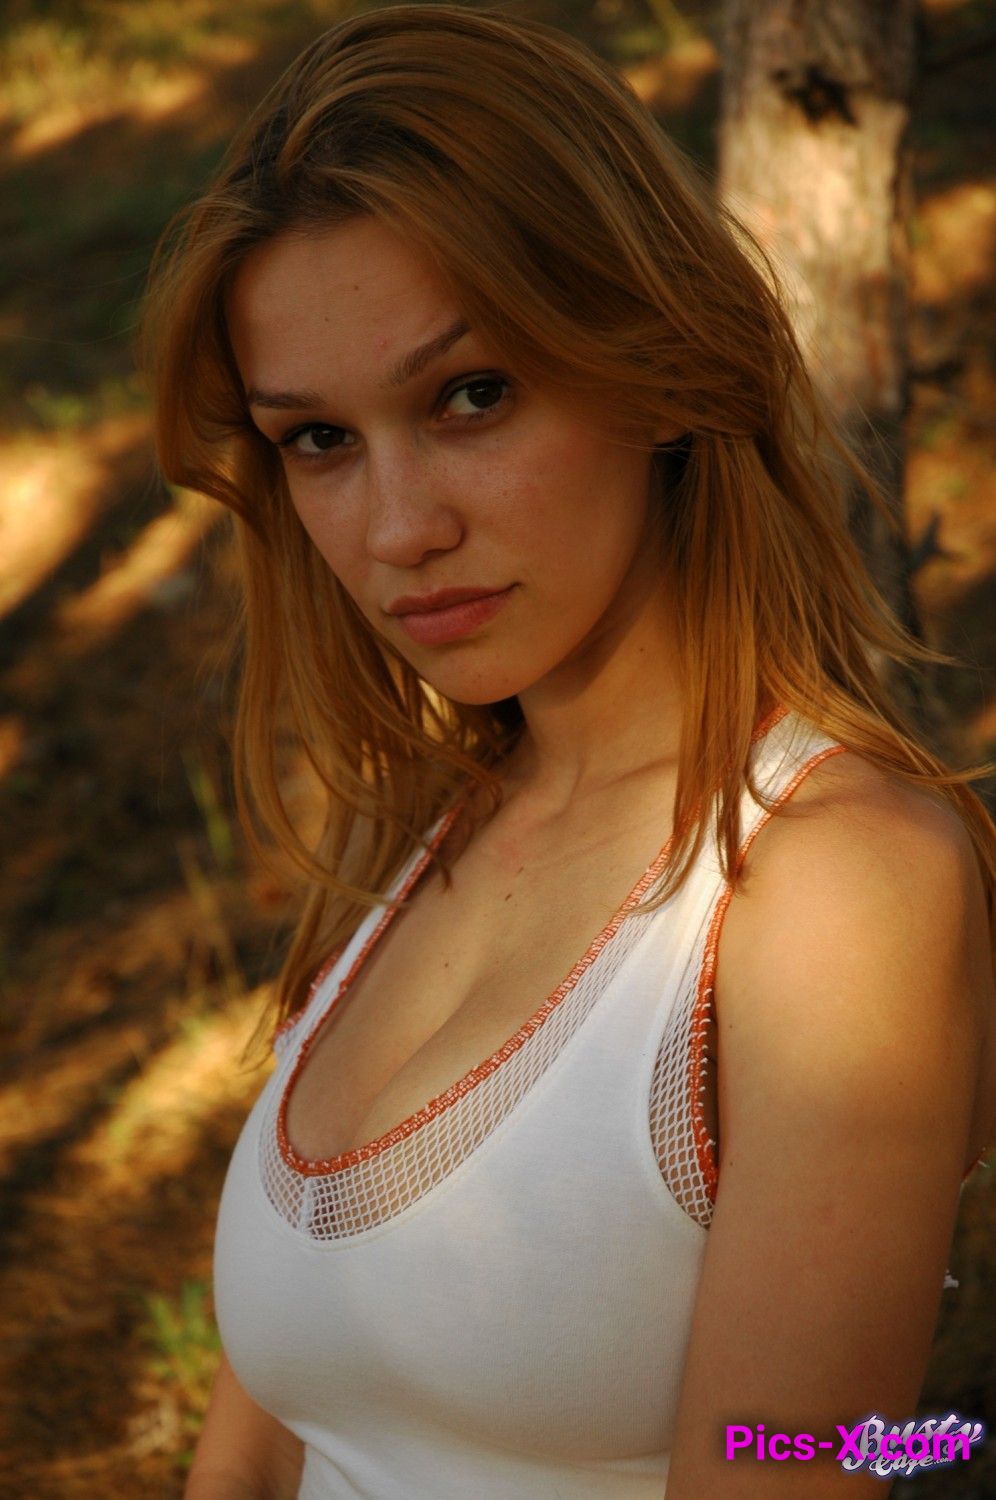 Polina Babe In The Woods - Image 1